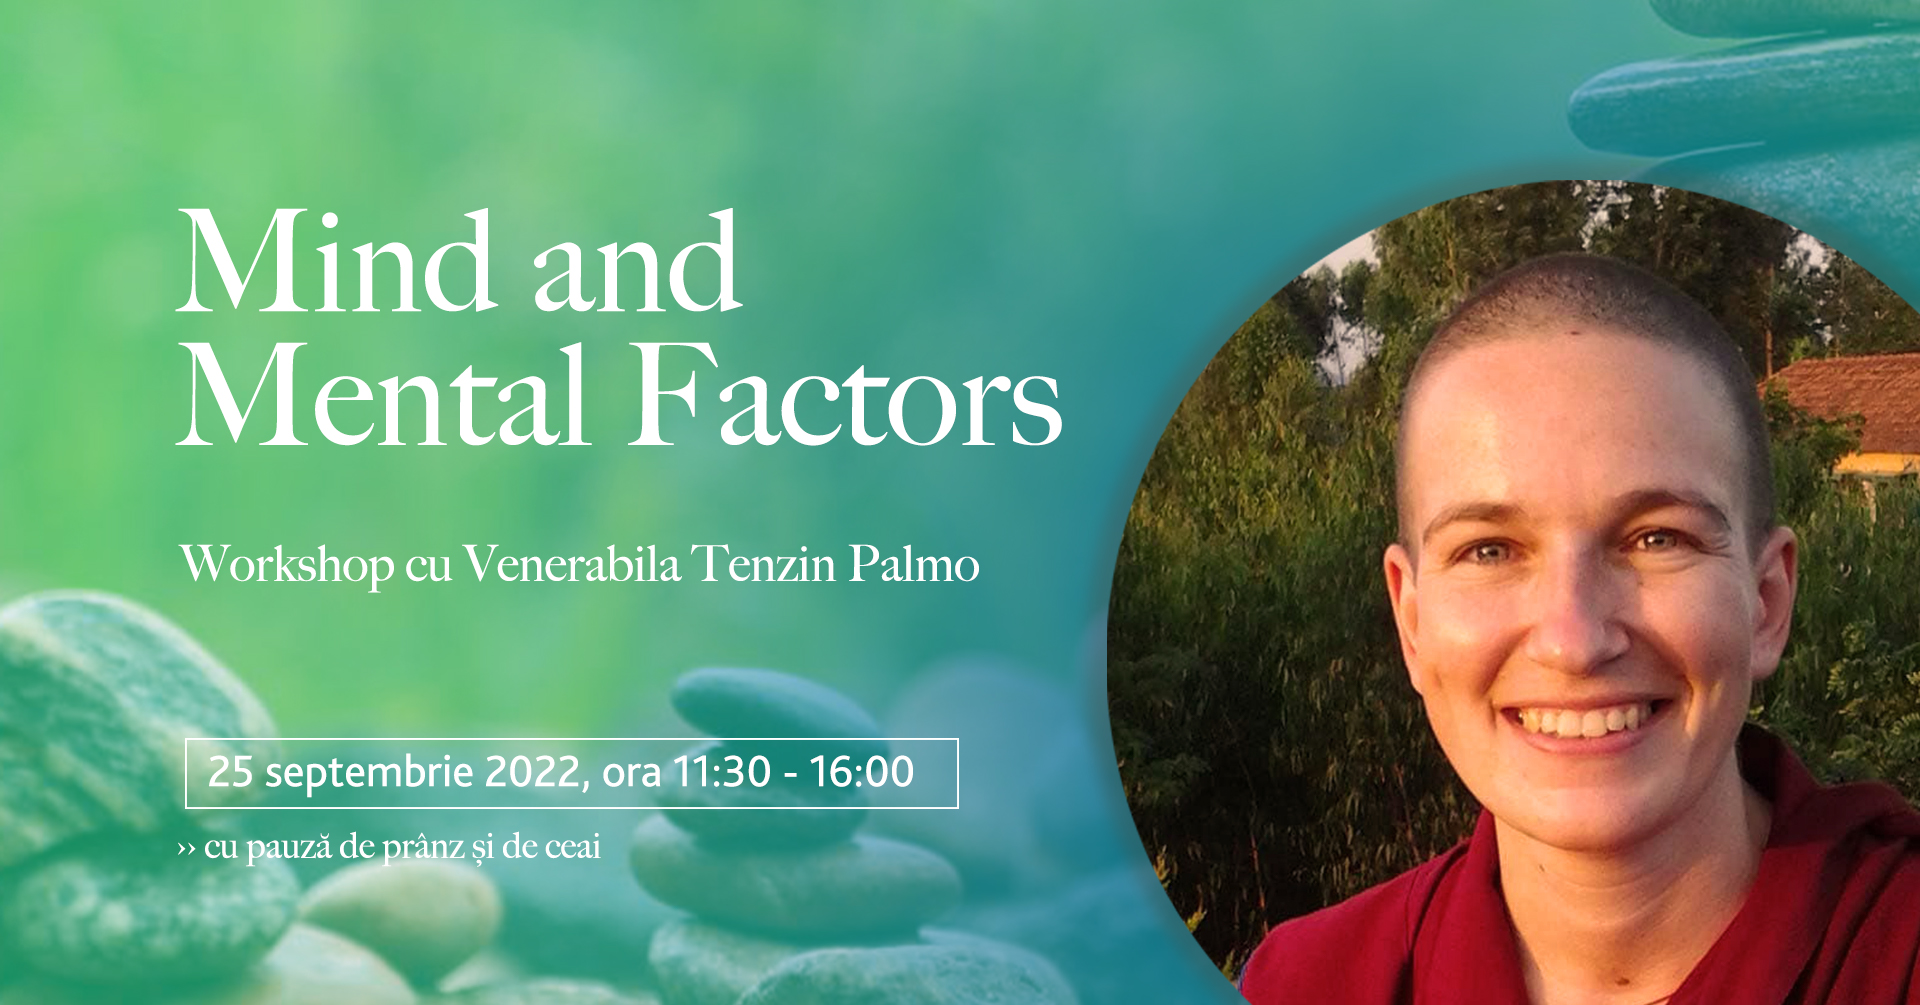 Mind and Mental Factors with ven Tenzin Palmo